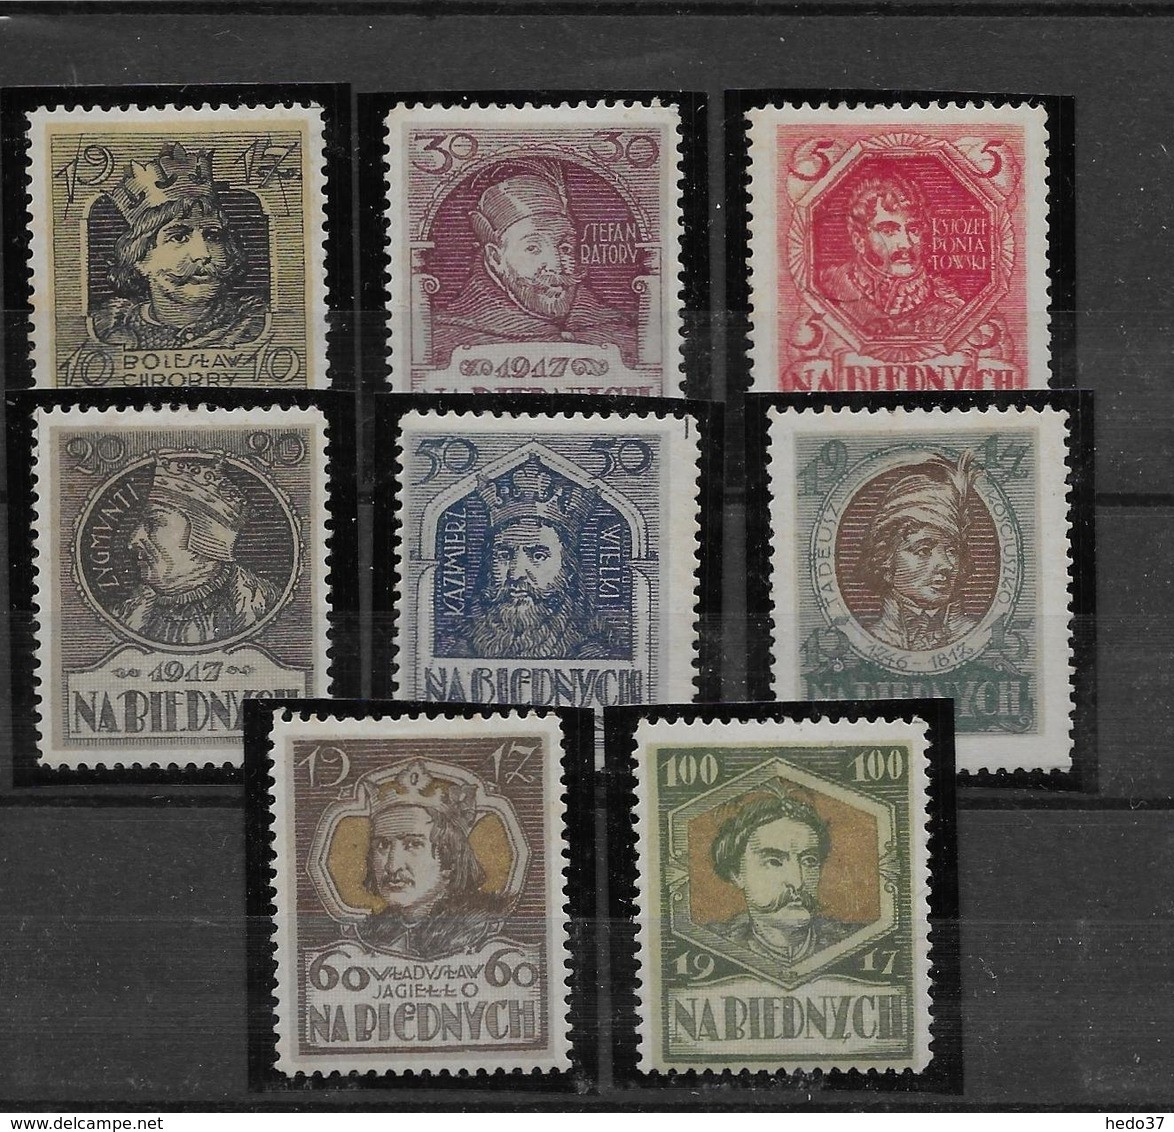 Pologne - Nabiednych - Neuf * Avec Charnière - TB - Unused Stamps